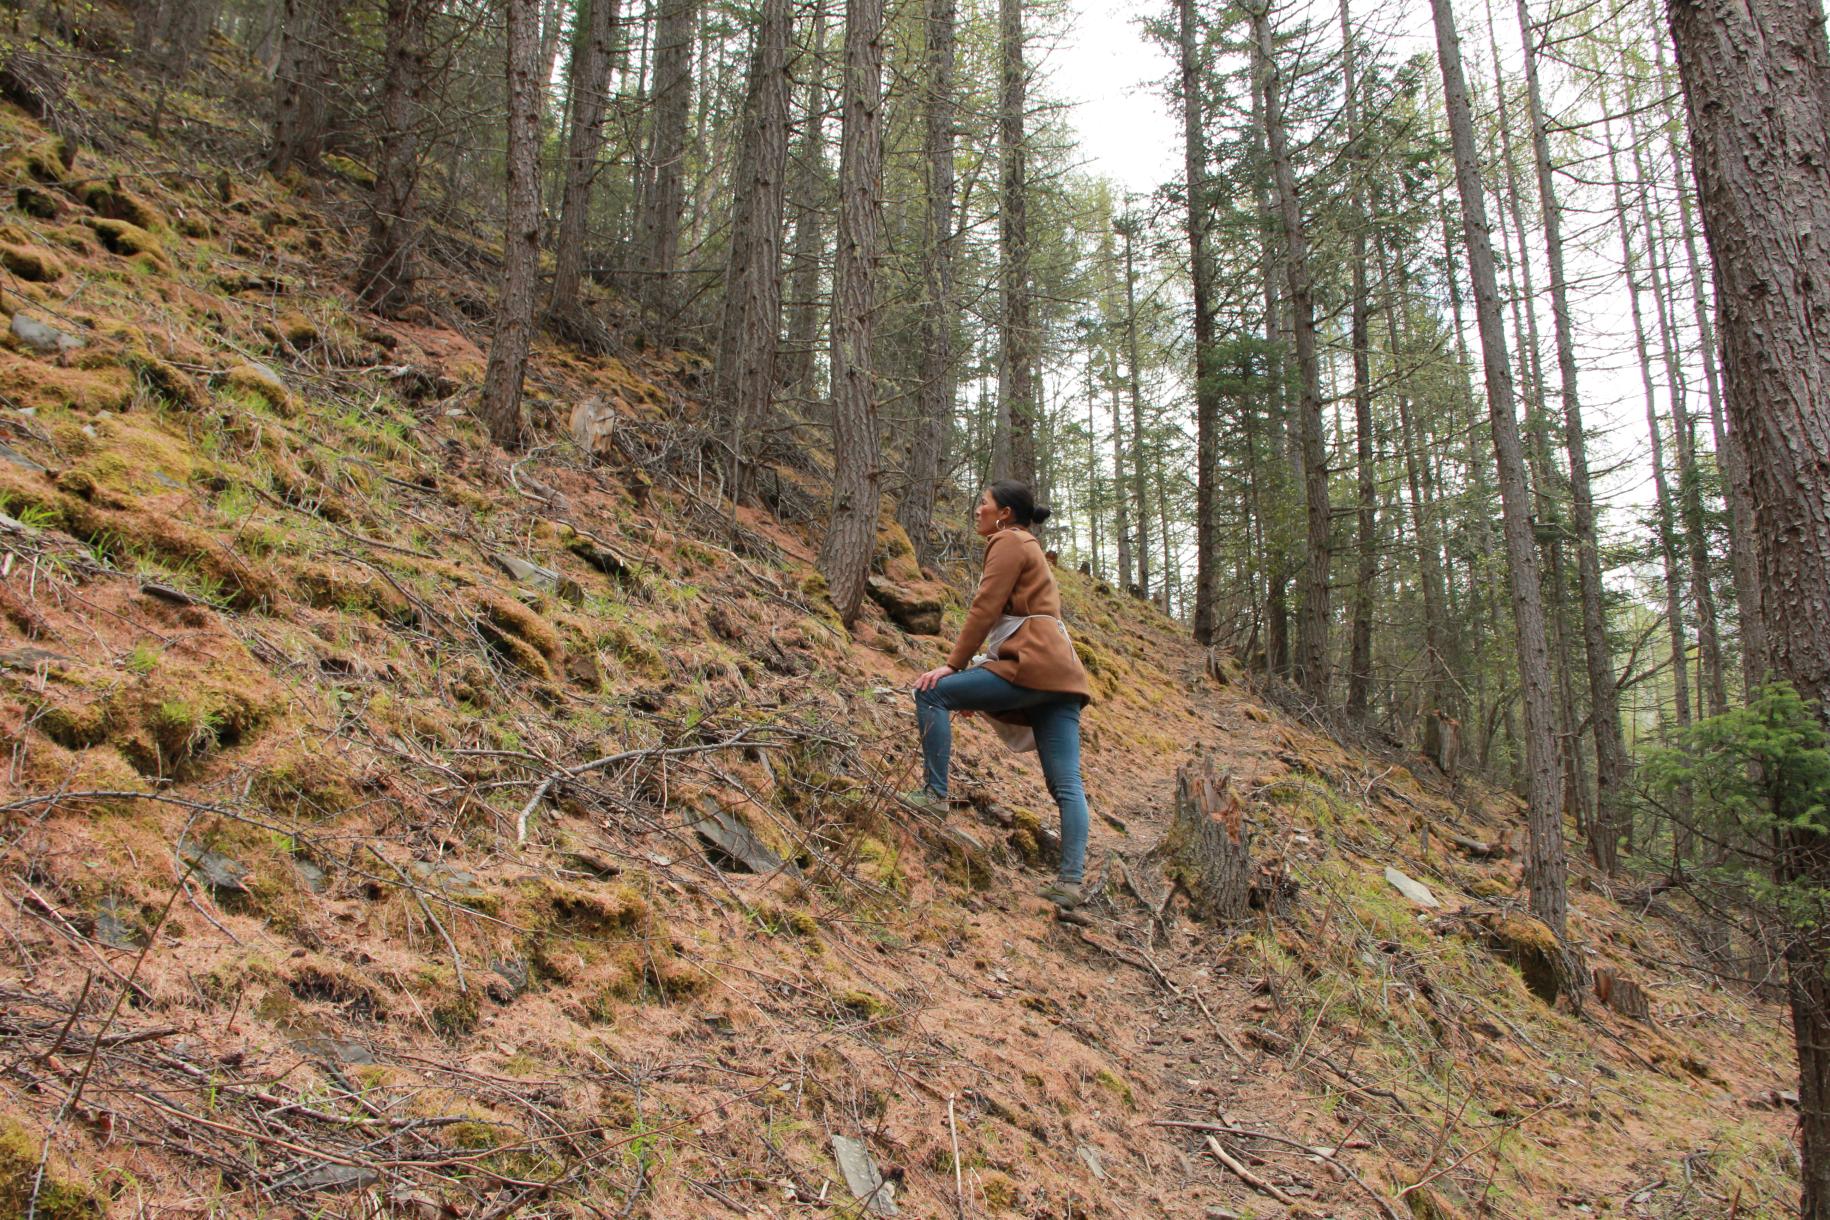 A woman stading on a slope of a mountain, with tall trees in the background.